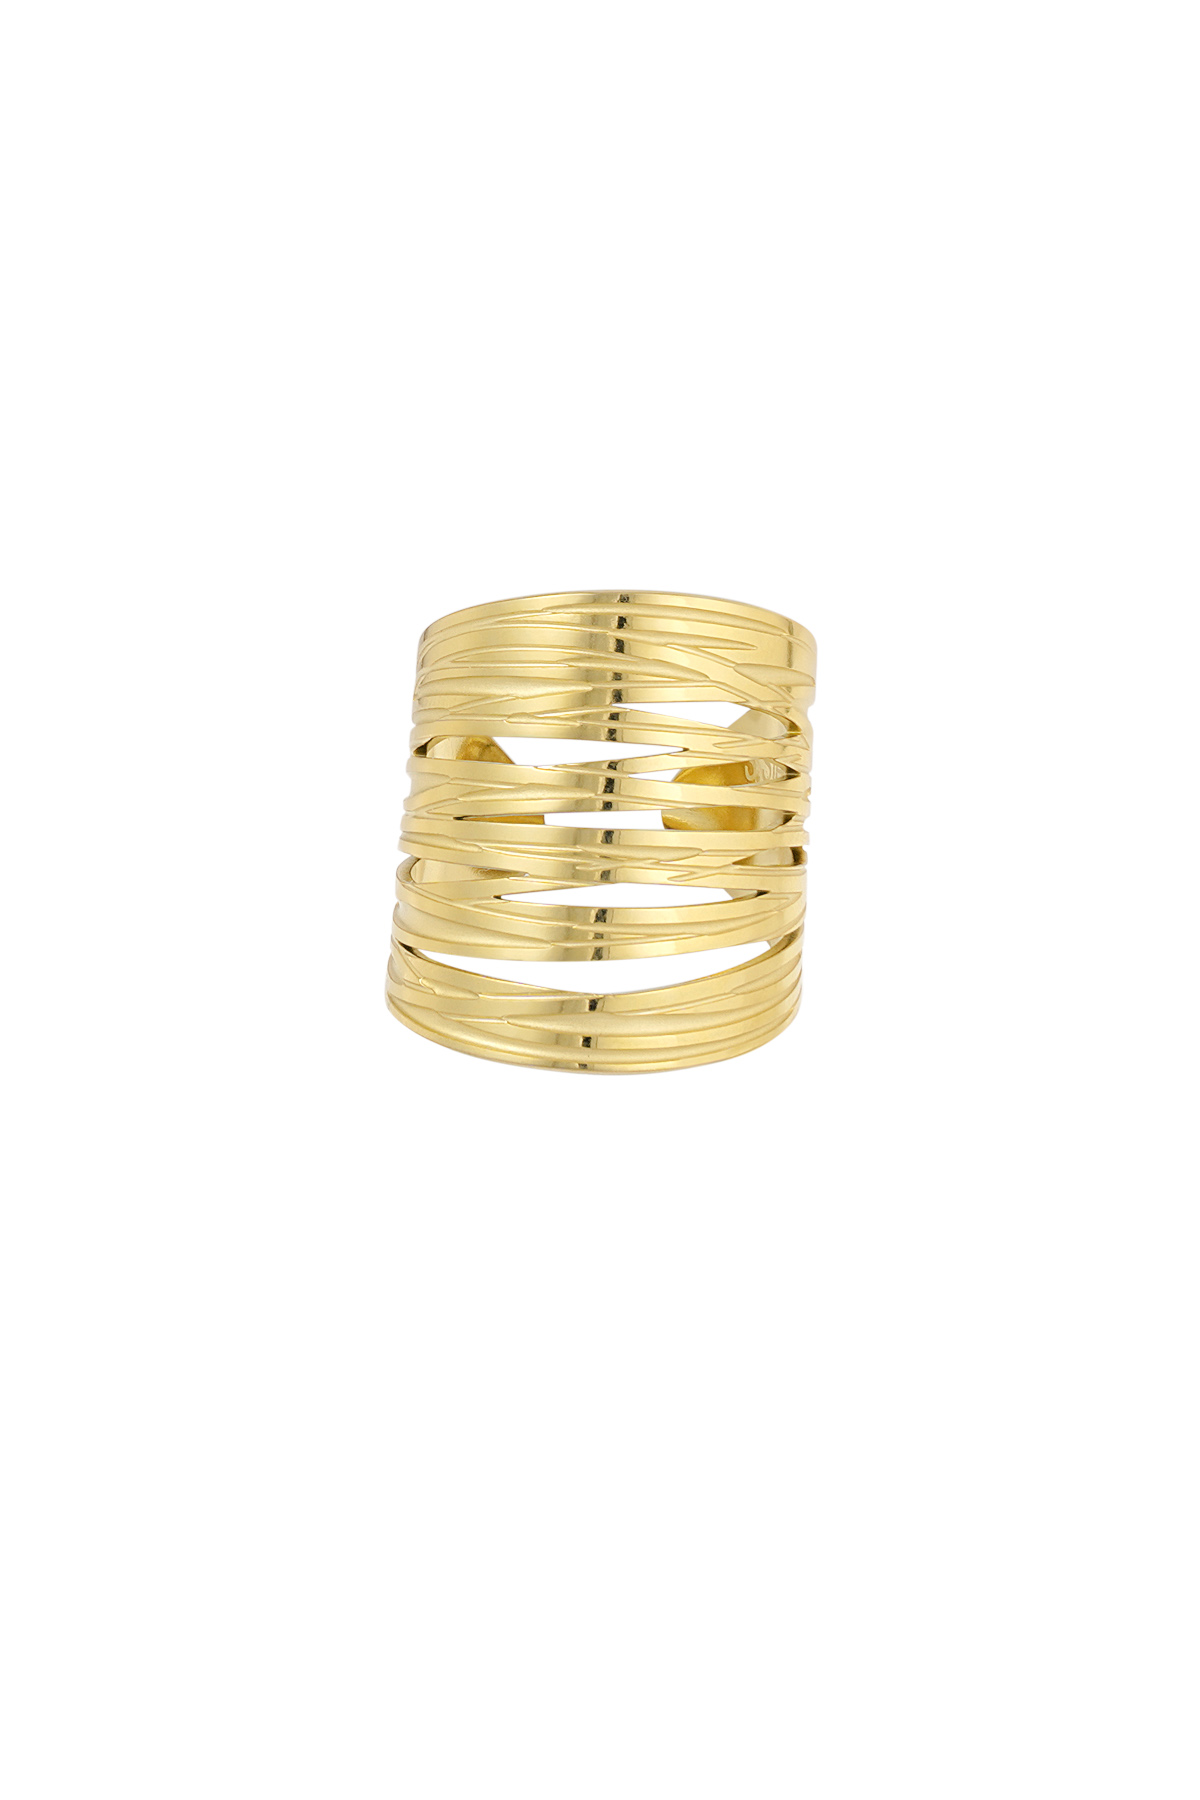 Long statement open ring - gold h5 